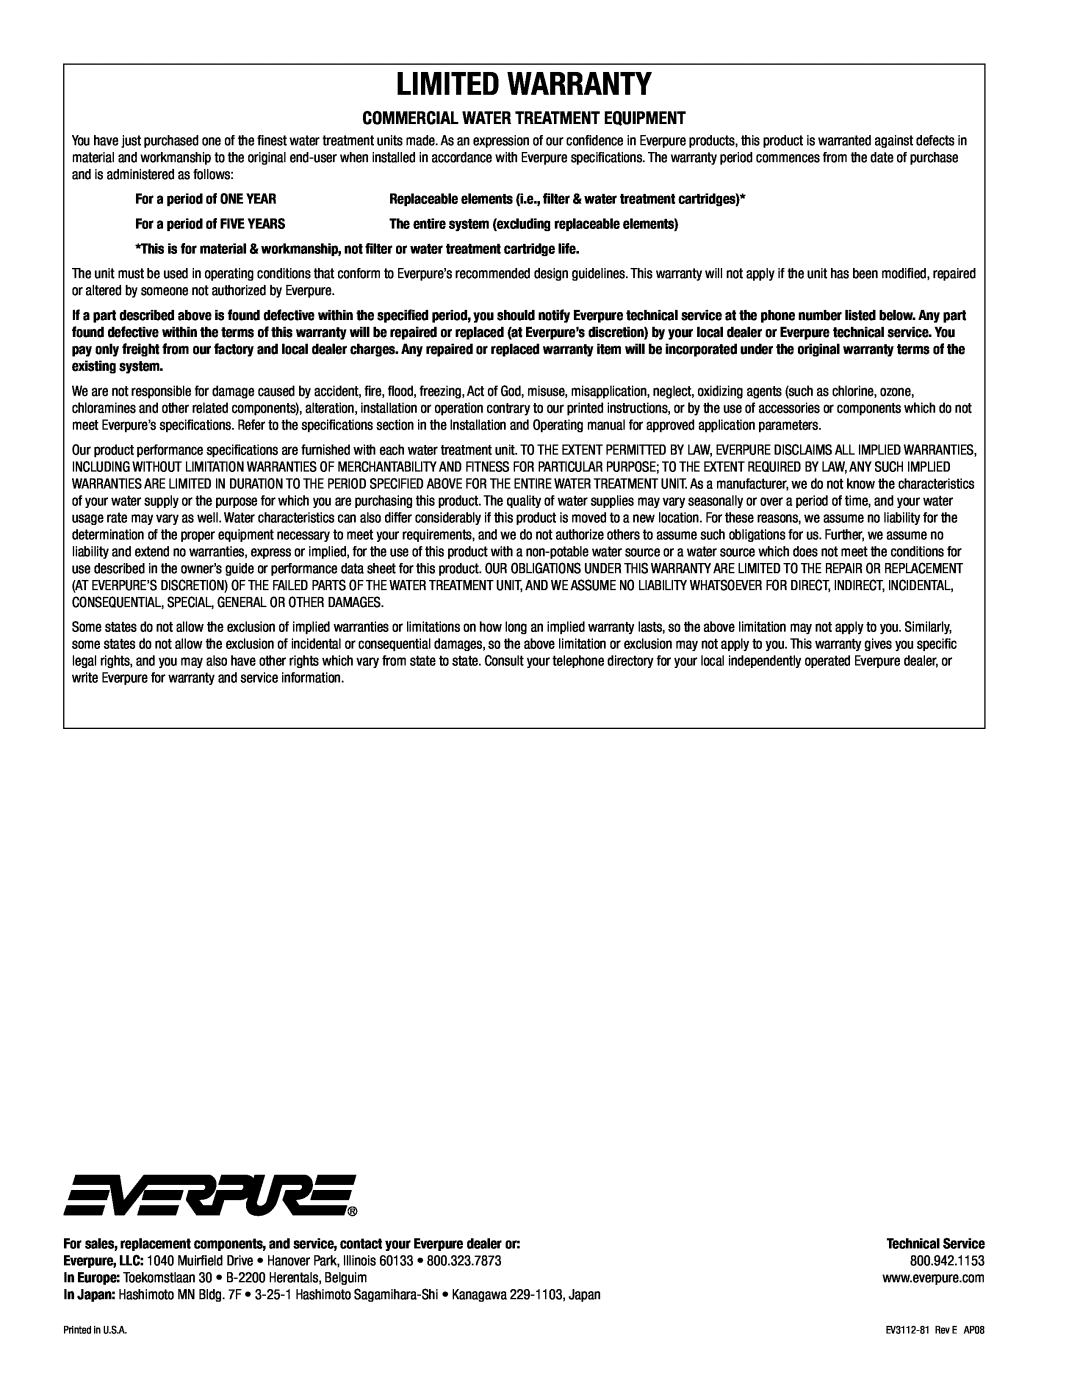 Everpure EV3112-81 installation and operation guide Commercial Water Treatment Equipment, Limited Warranty 